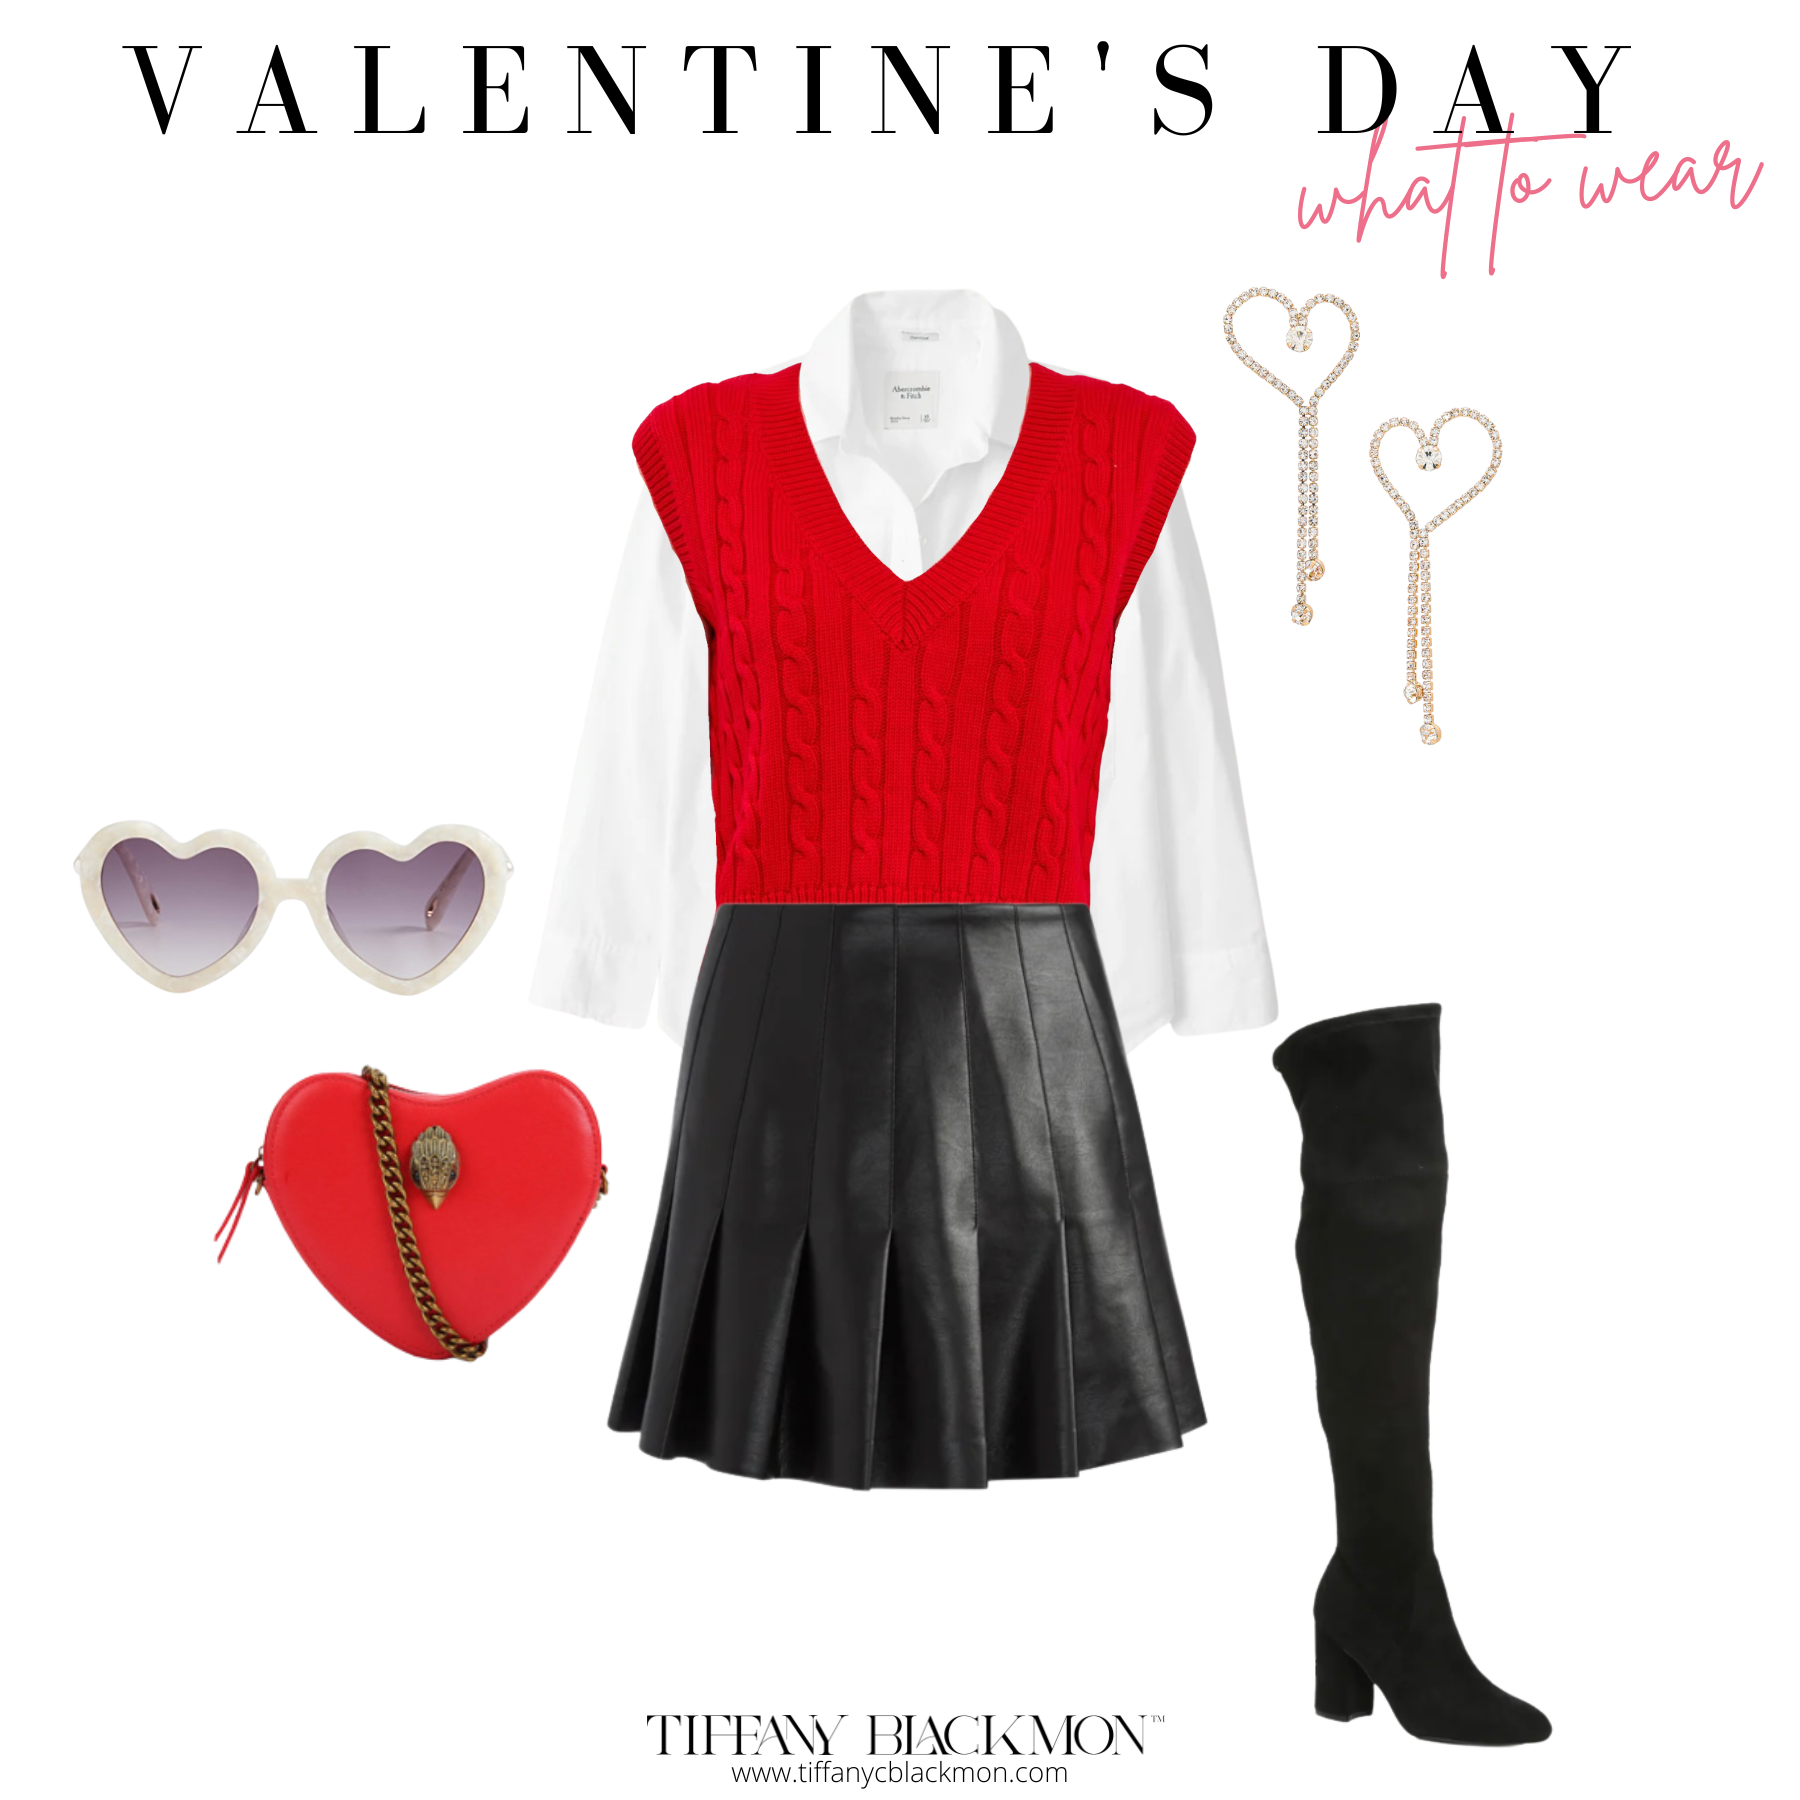 Valentine's Day: What to Wear
#sweatervest #boots #tallboots #red #valentinesday #datenight #purse #accessories #earrings #jewelry 